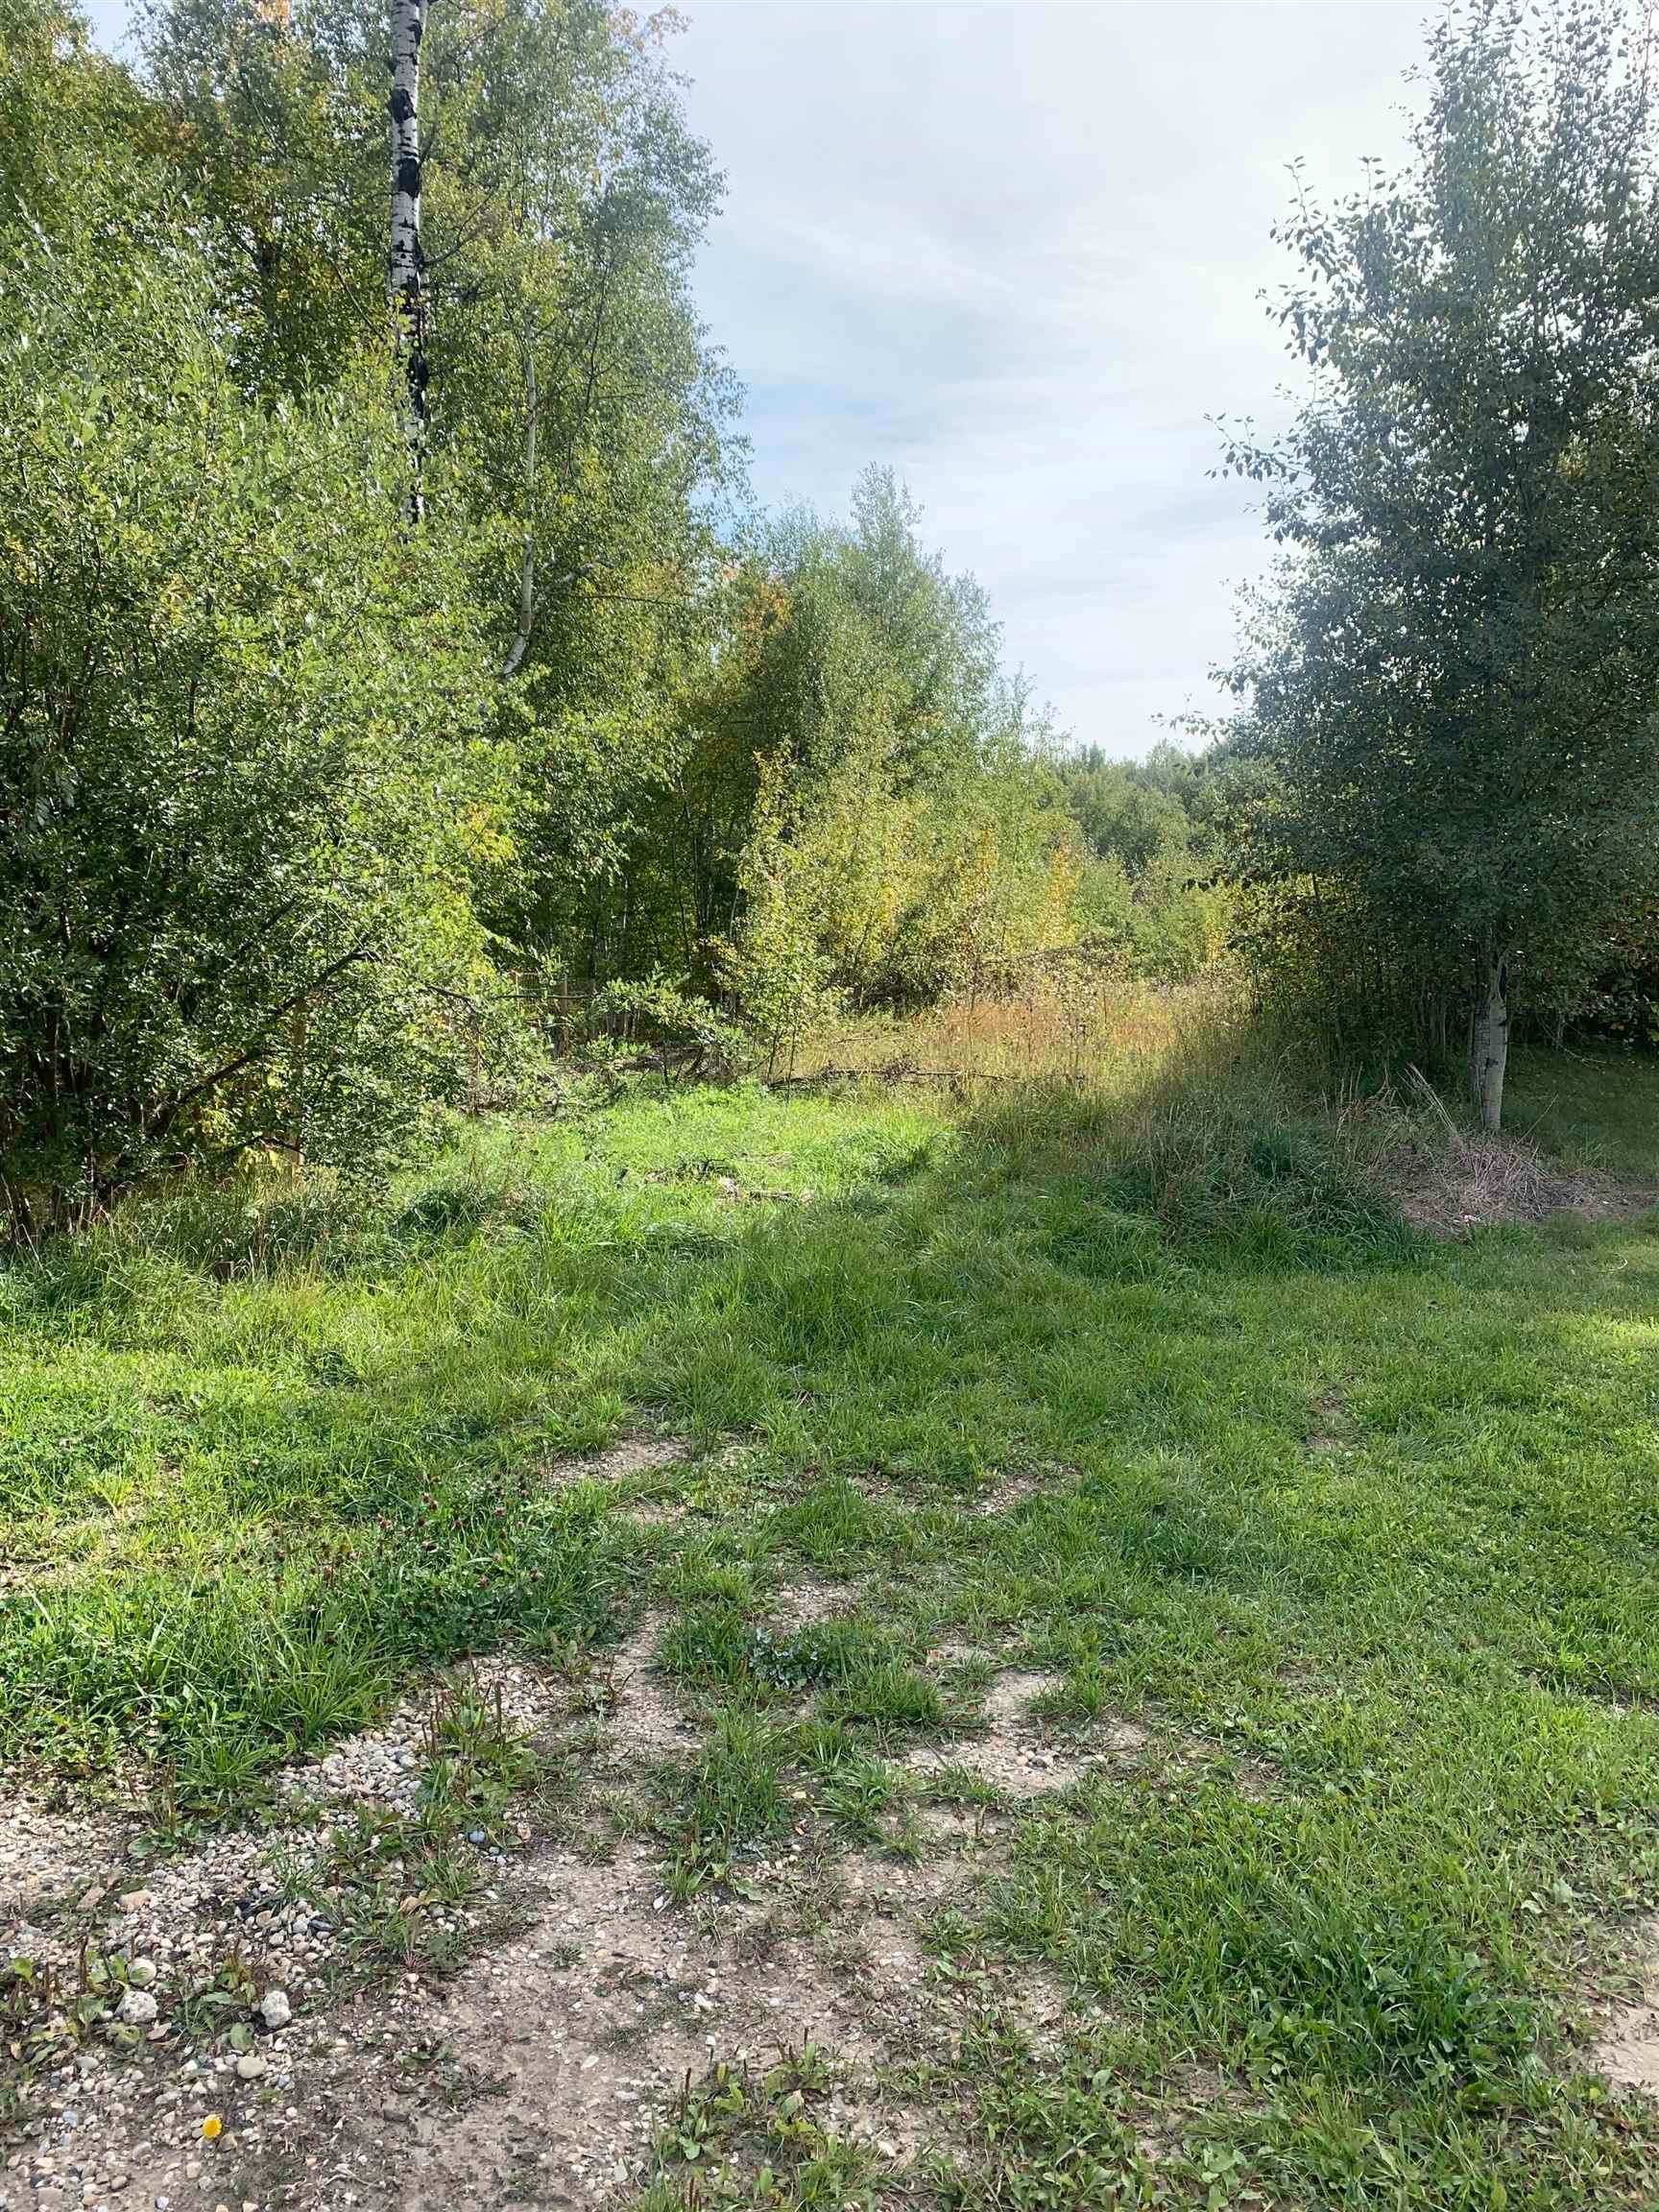 Main Photo: 54419 Range Rd. 14: Rural Lac Ste. Anne County Rural Land/Vacant Lot for sale : MLS®# E4263343